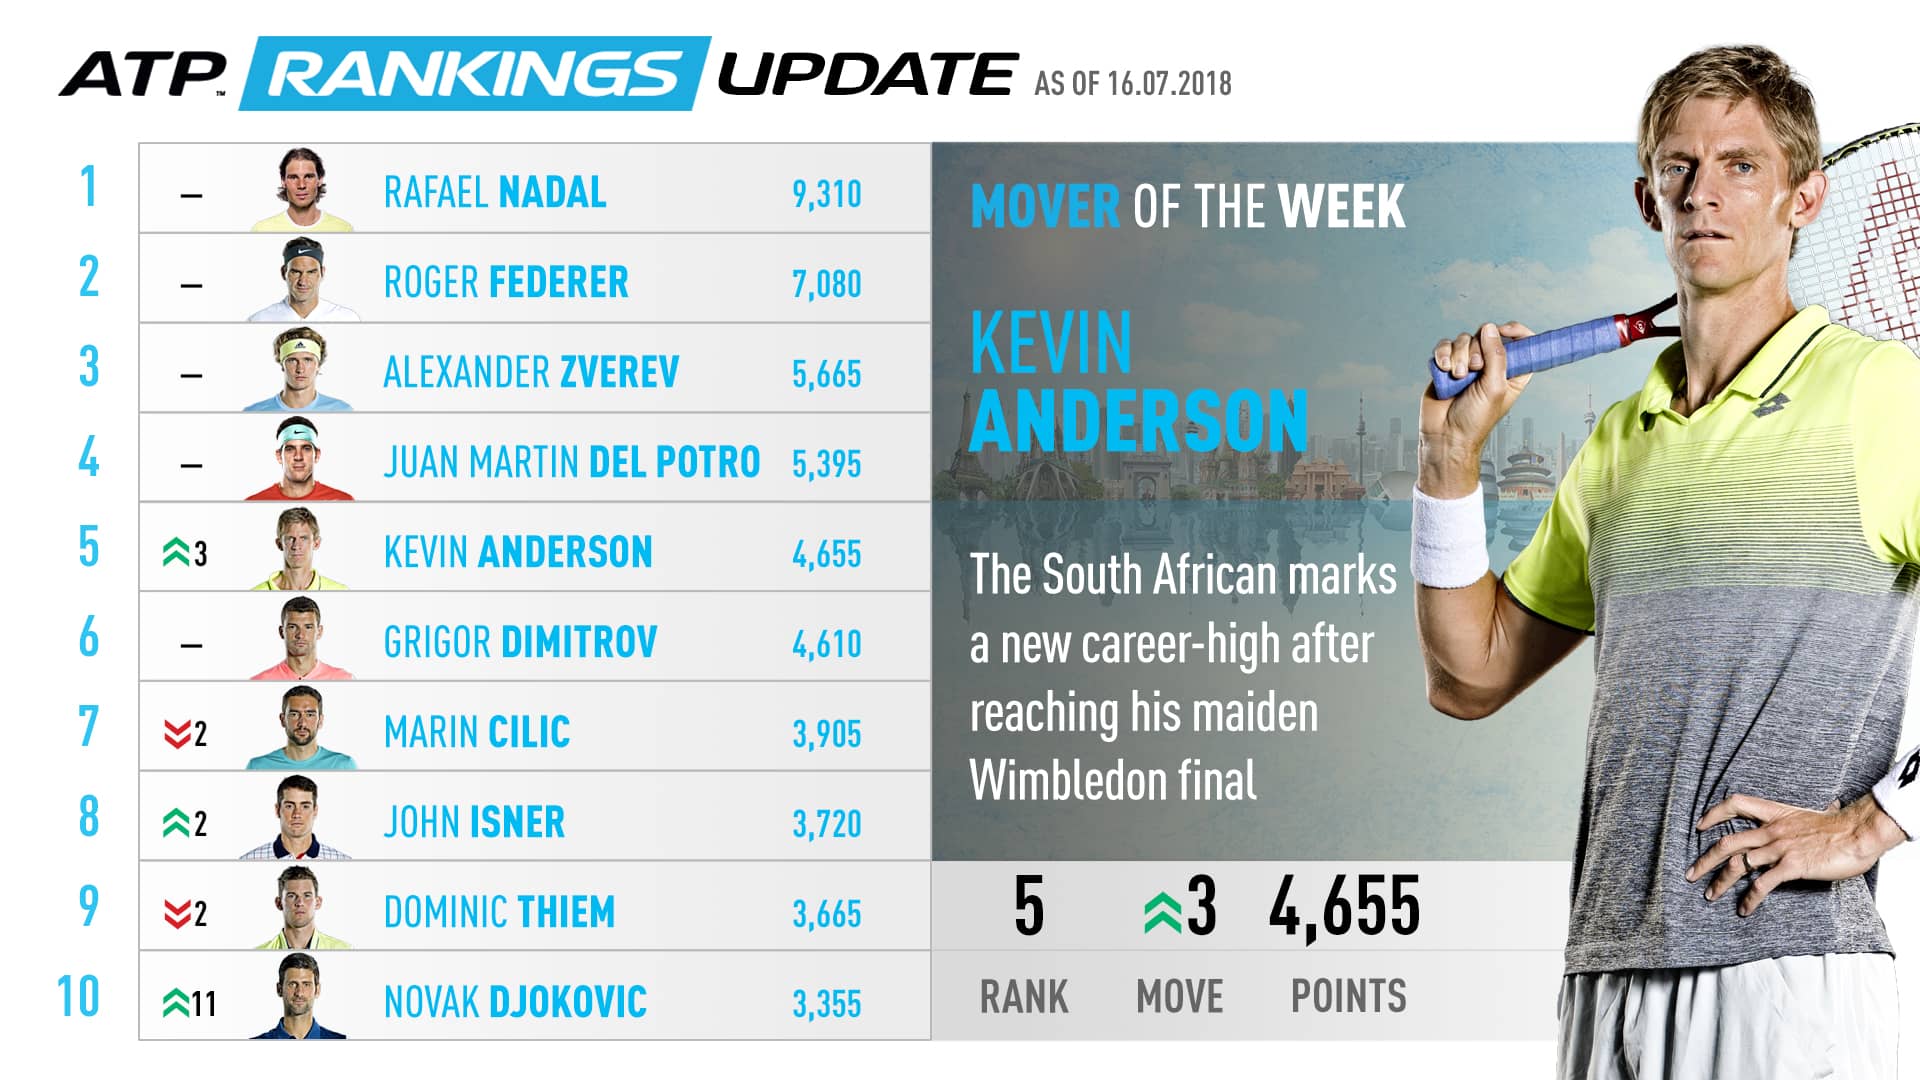 Kevin Anderson Cracks Top 5, Reaches Another New Career-High; Djokovic Returns To Top 10 ATP Tour Tennis